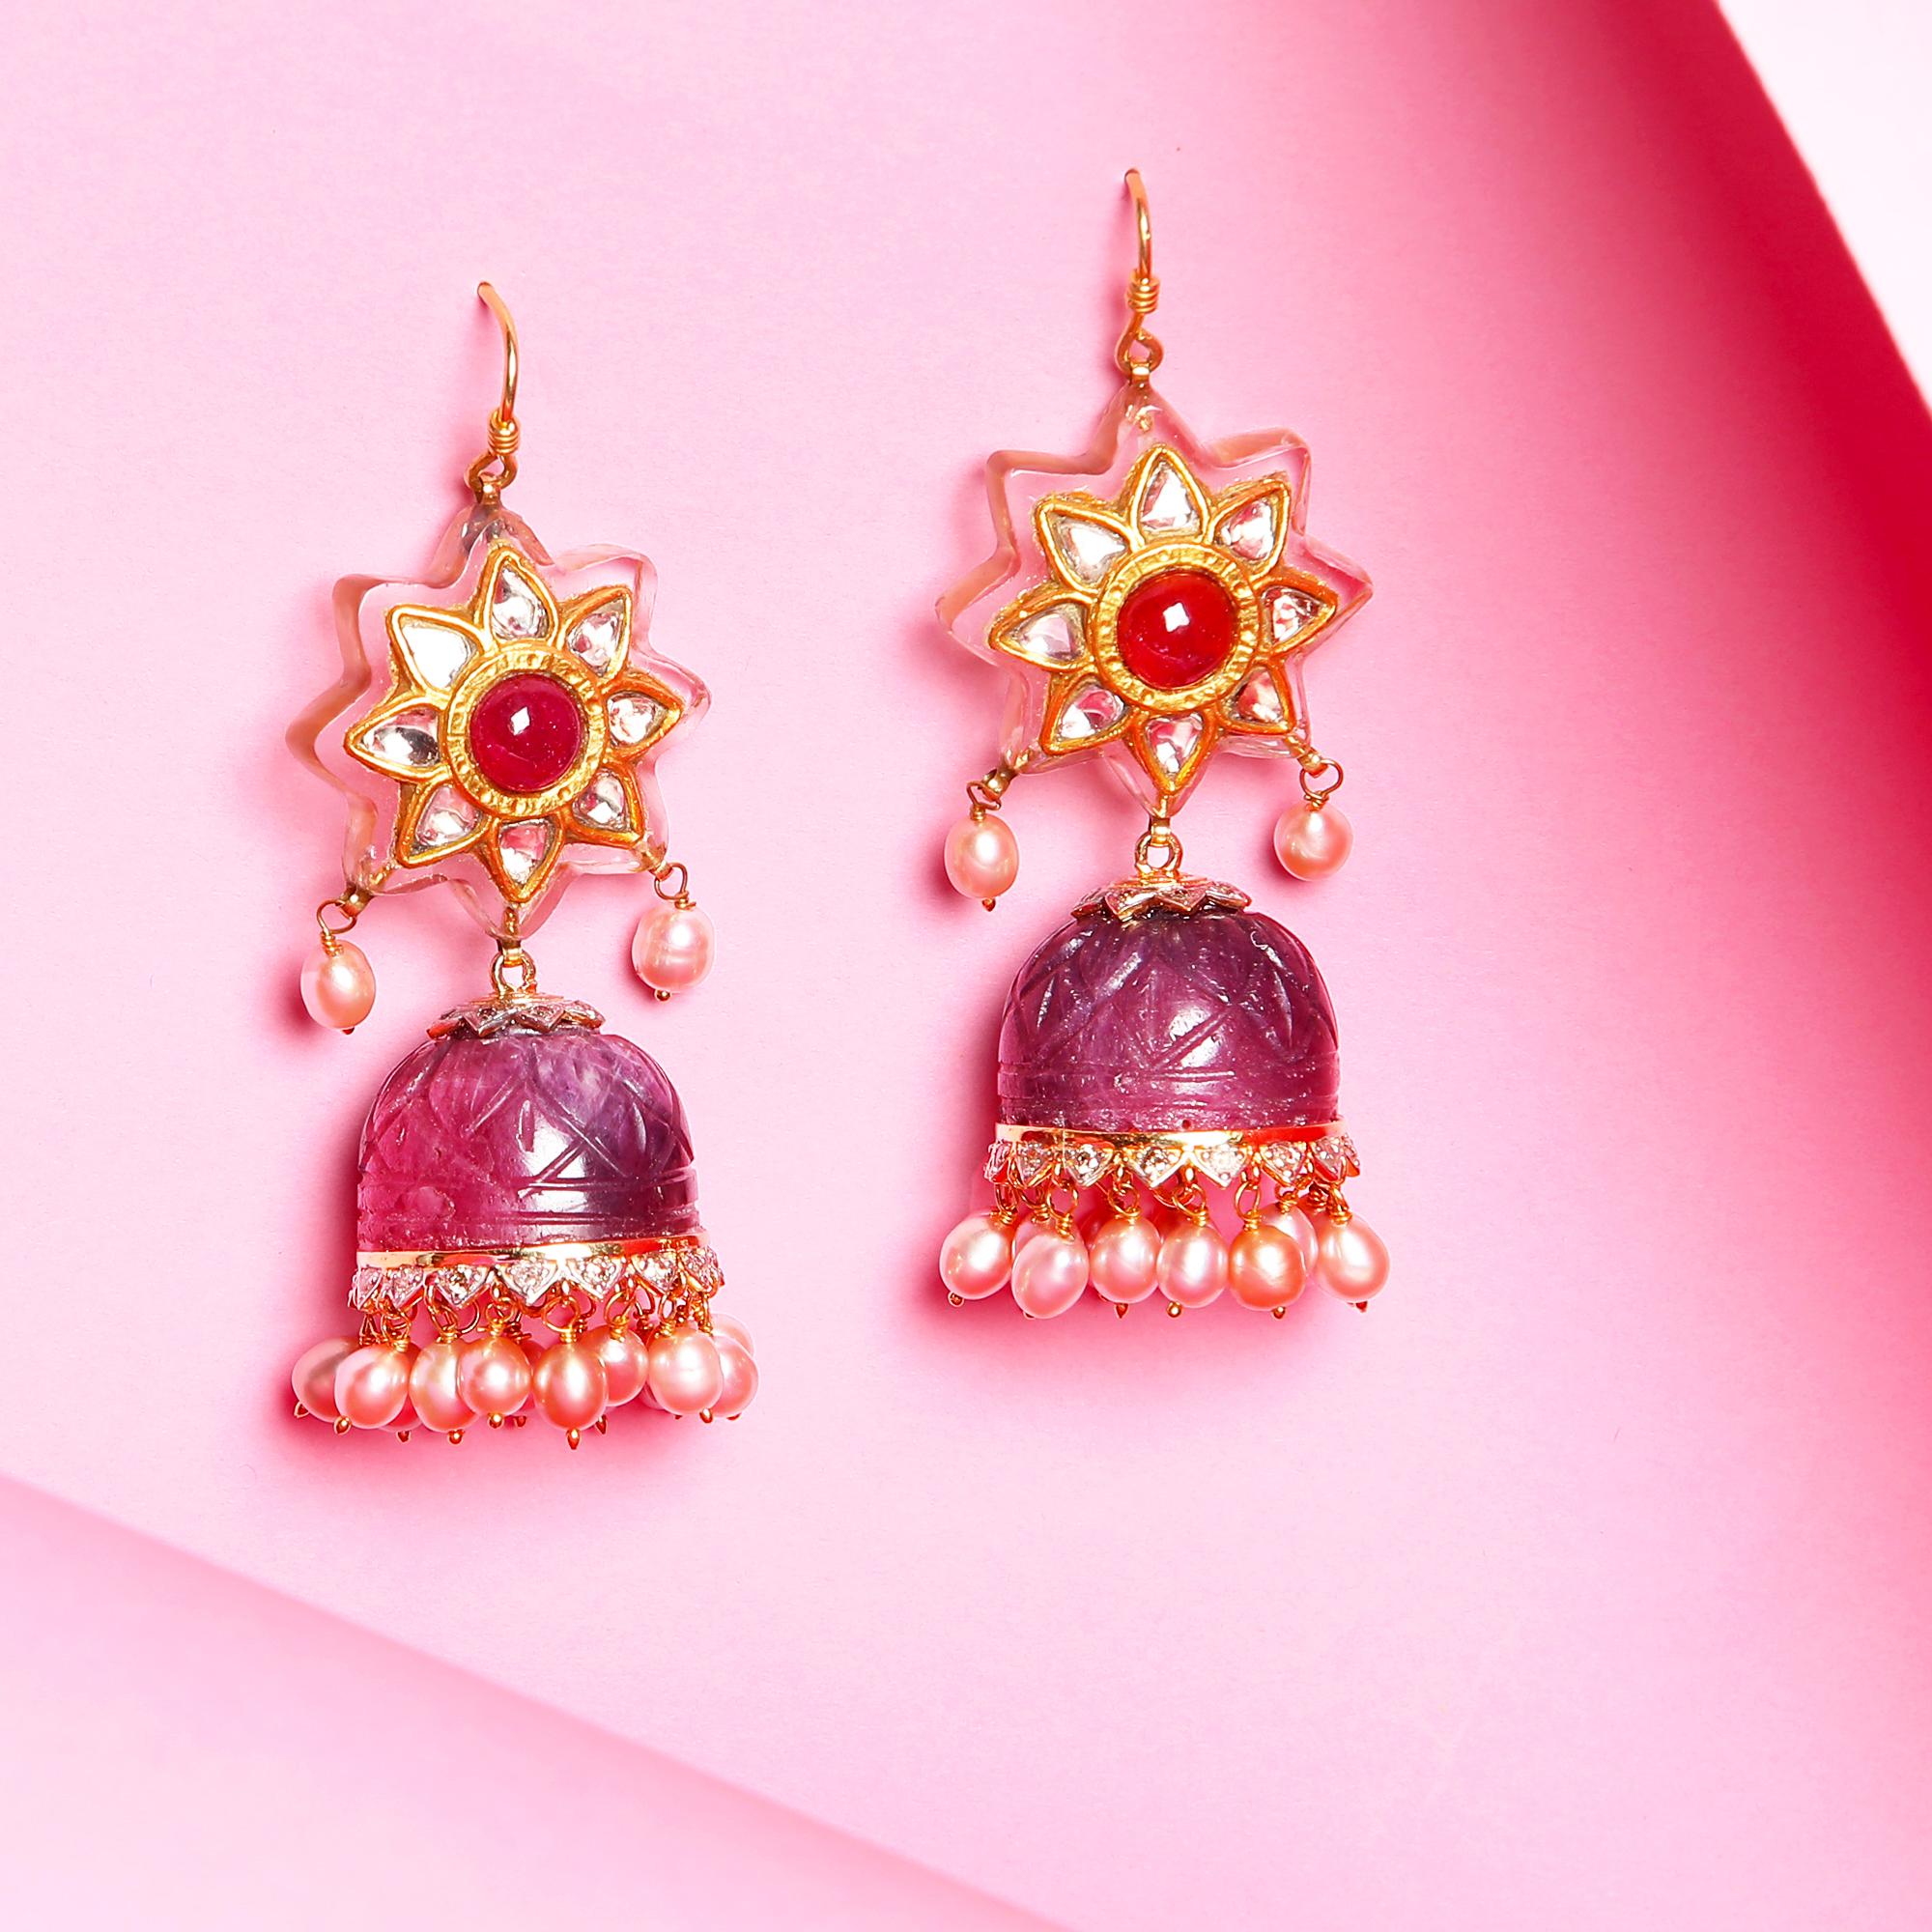 Intricately carved rock crystal Jhumkas (Umbrella shaped danglers) flanked by Rubies, Diamonds and Pearls. Set in gold.